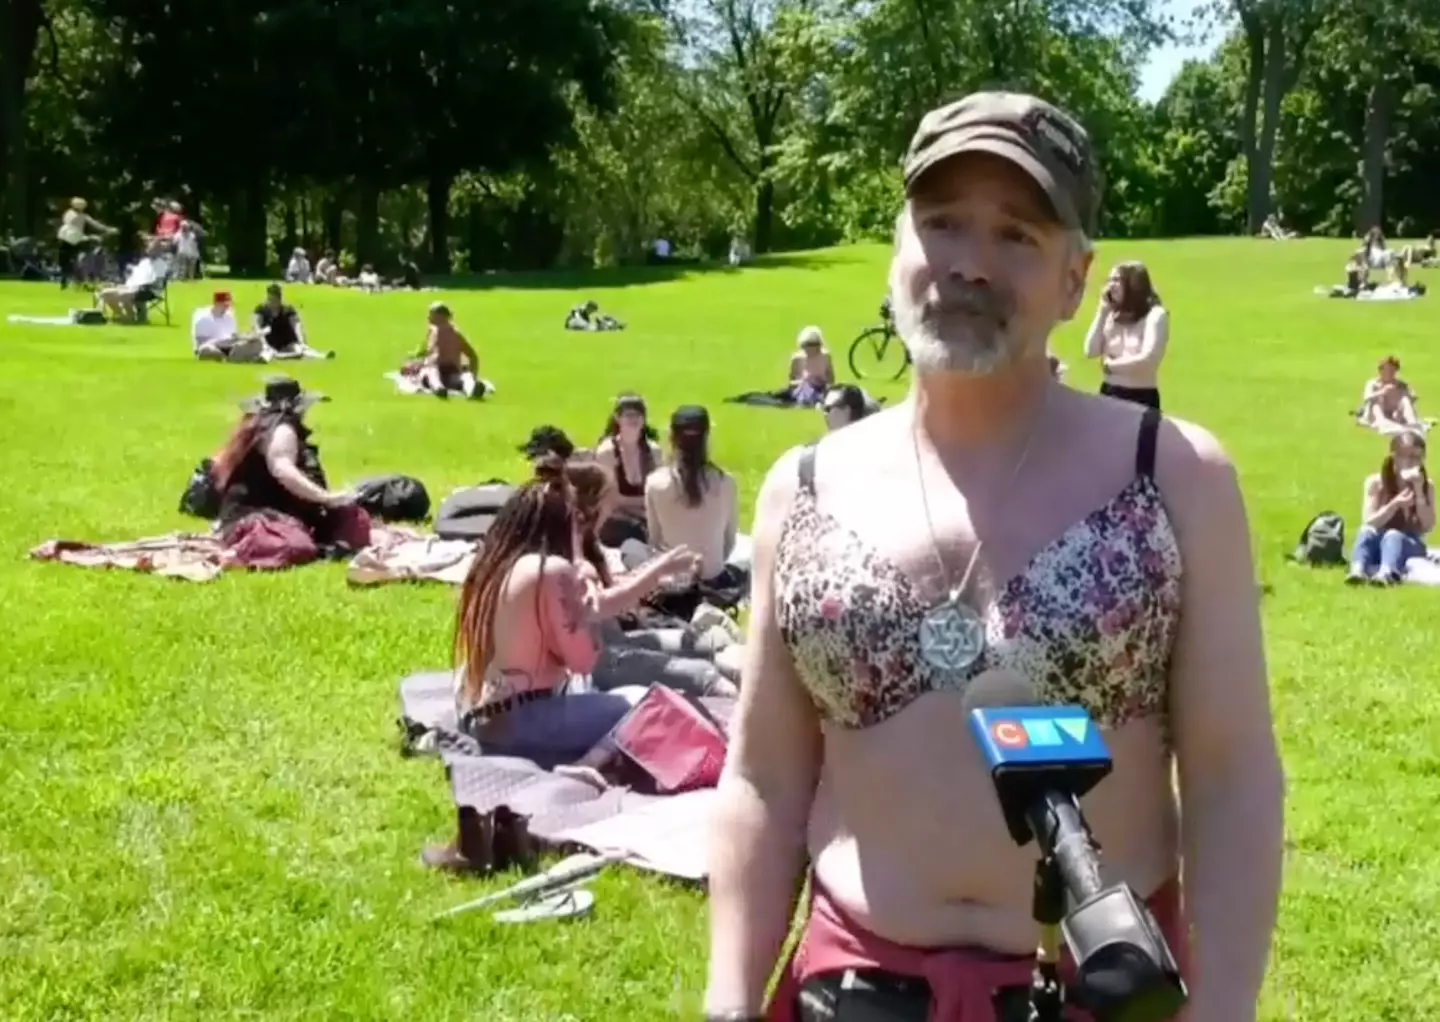 Stephane Salois wore a bra to highlight the issue of gender inequality.